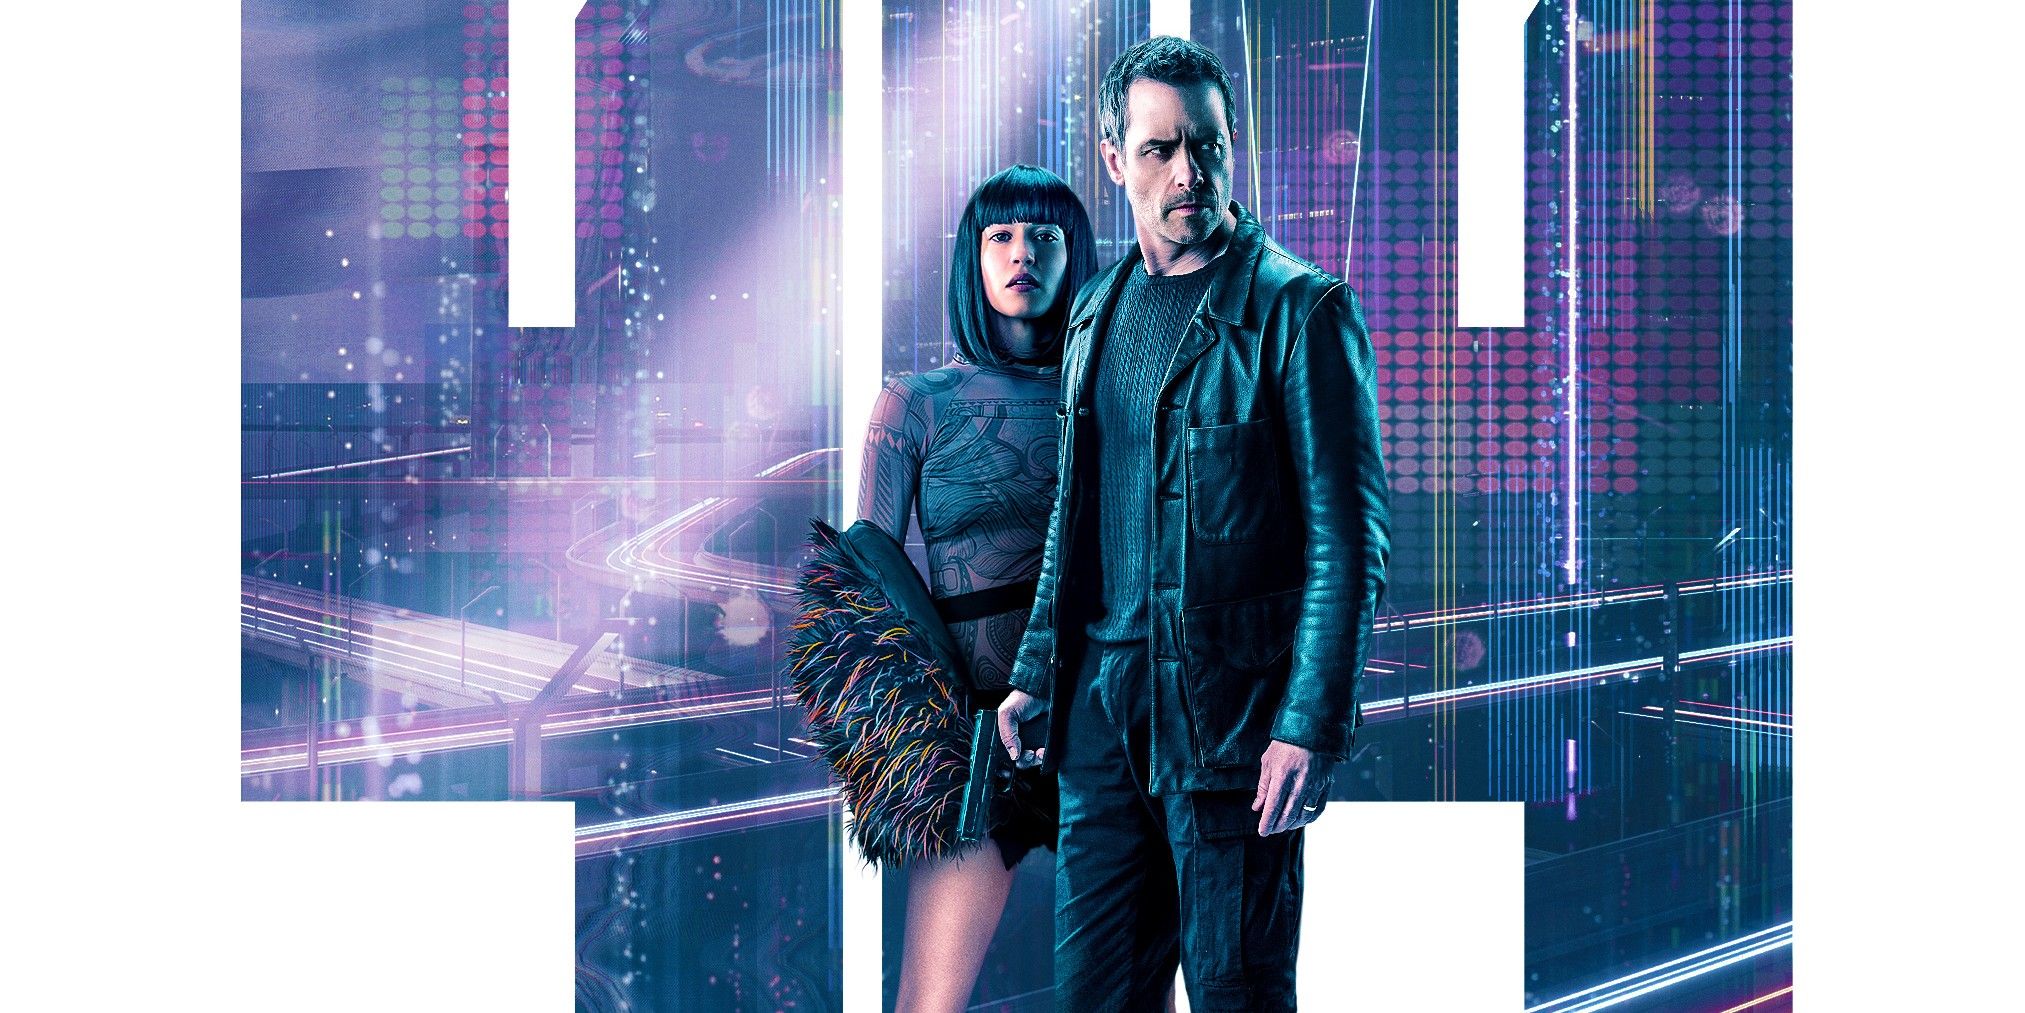 Main characters in black leather cyberpunk stand in front of the numbers 414 made from an image of a city with outrun aesthetic